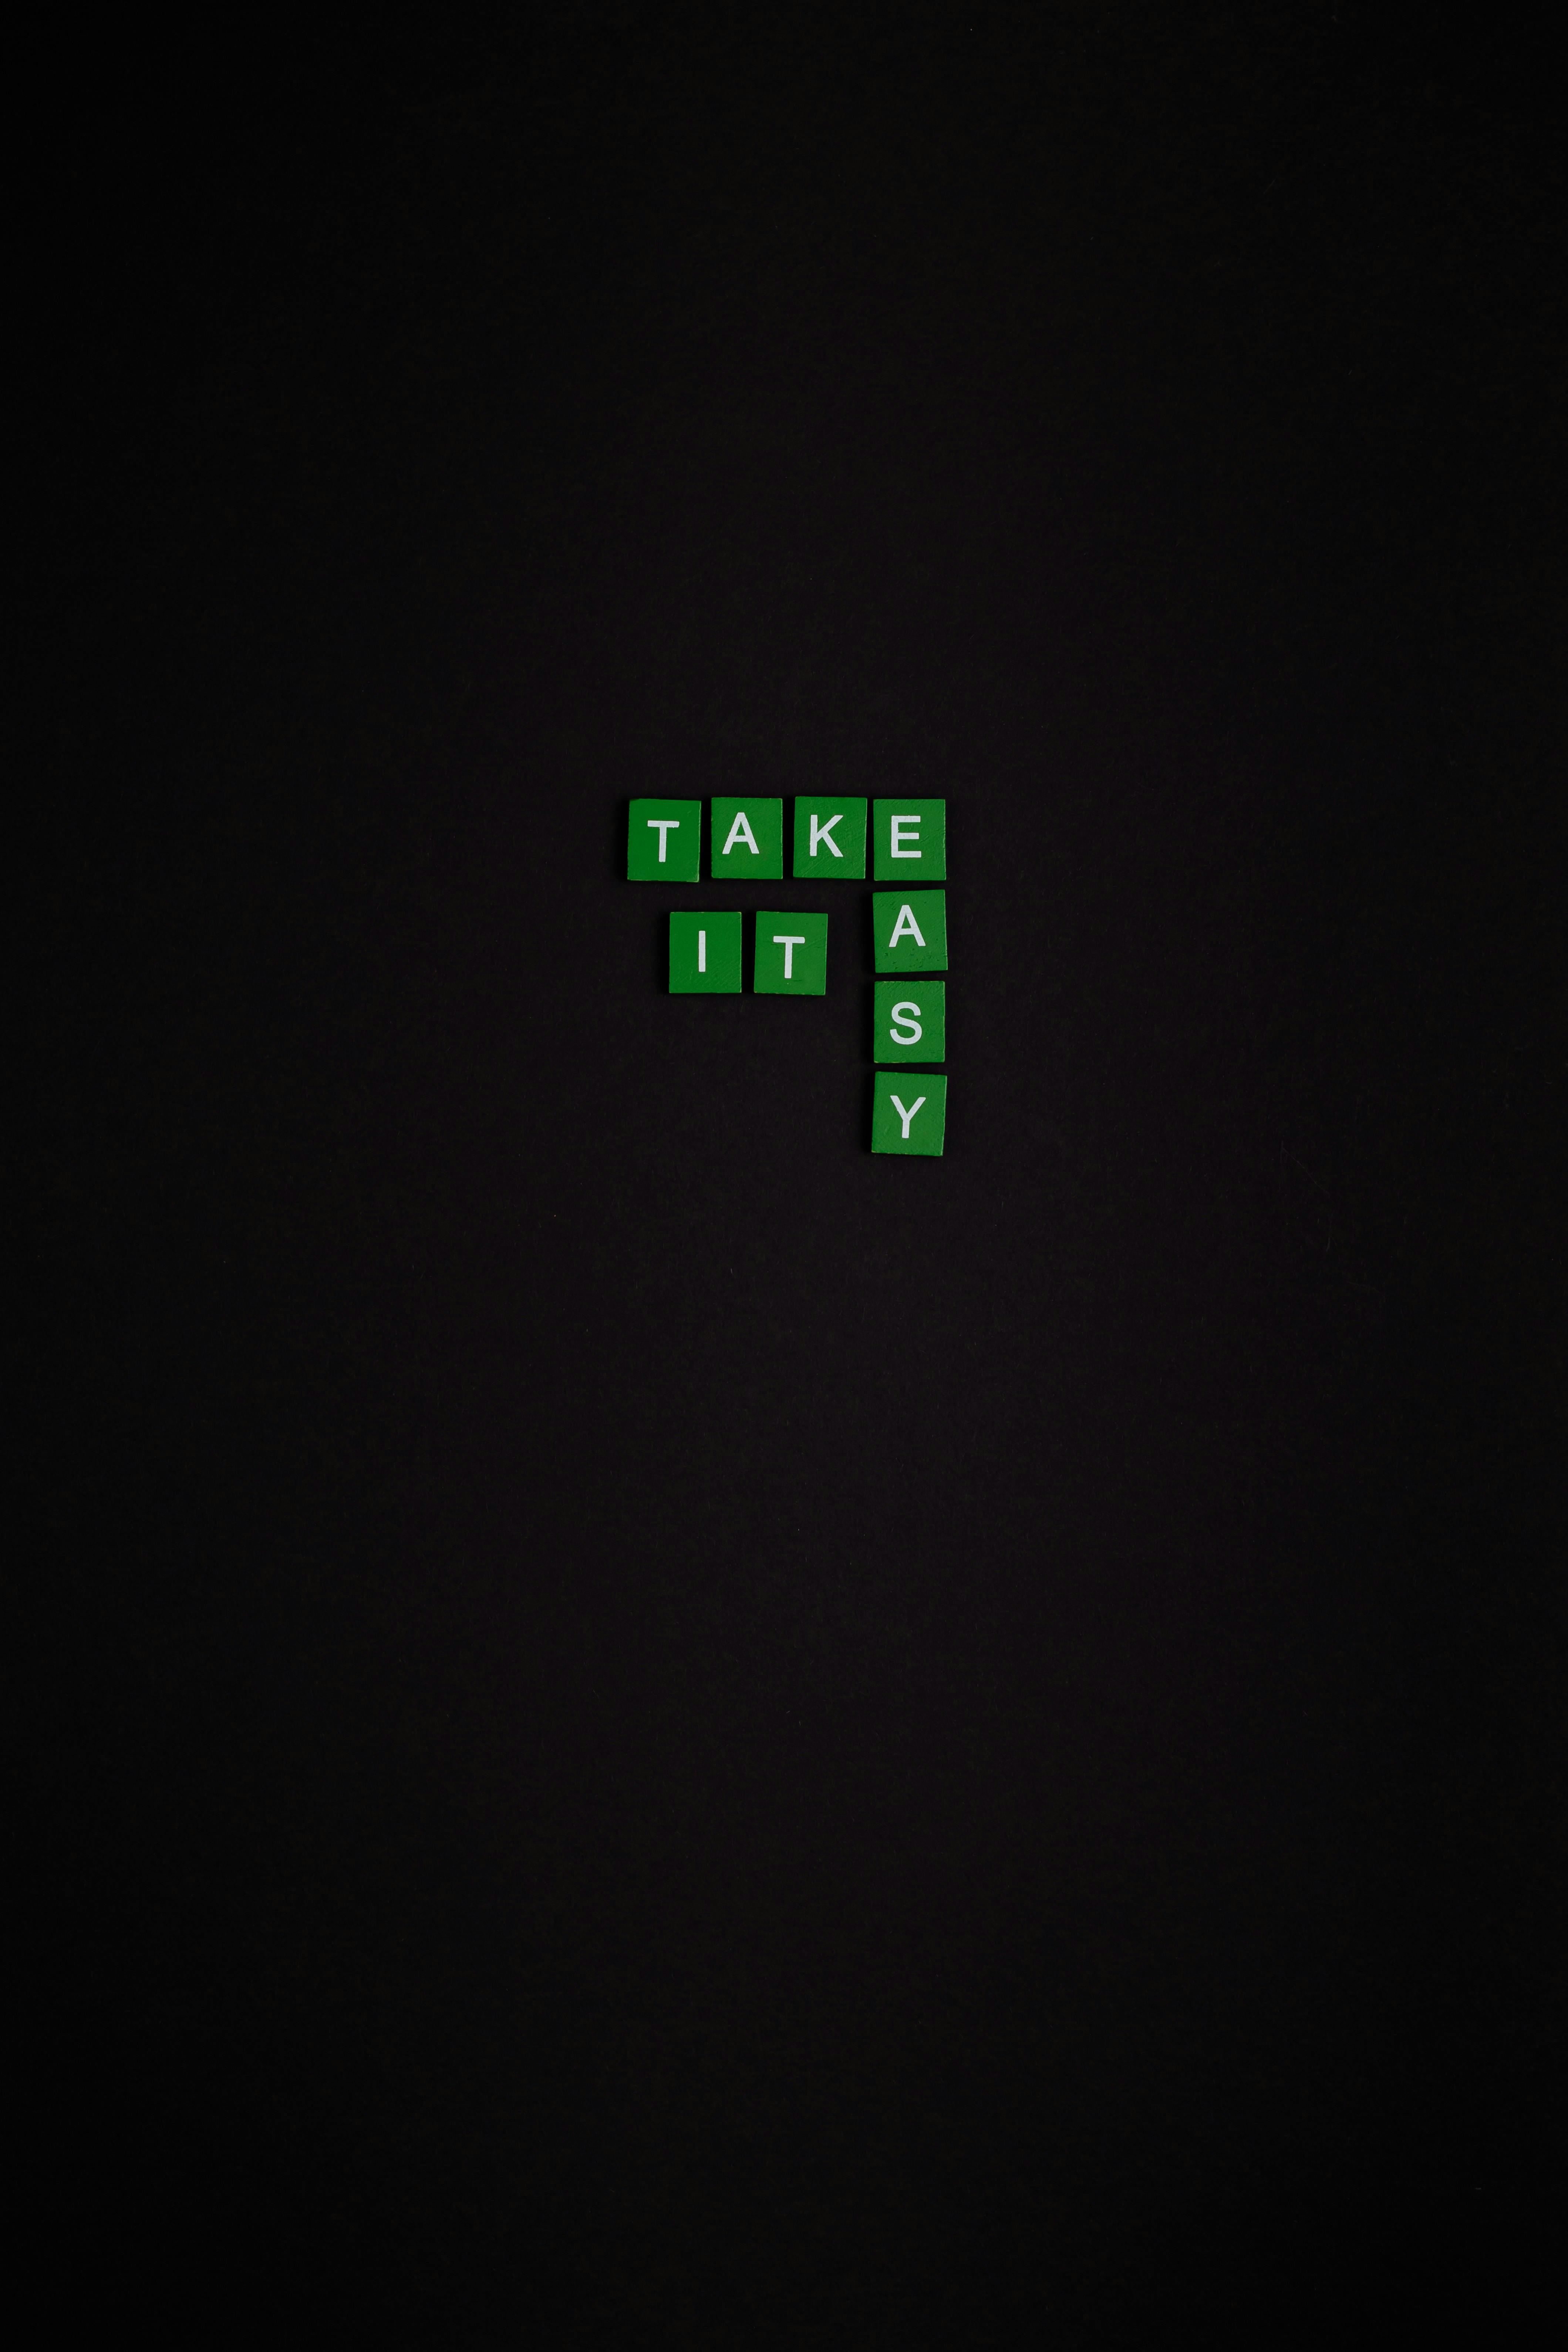 green and white text based tiles on black background